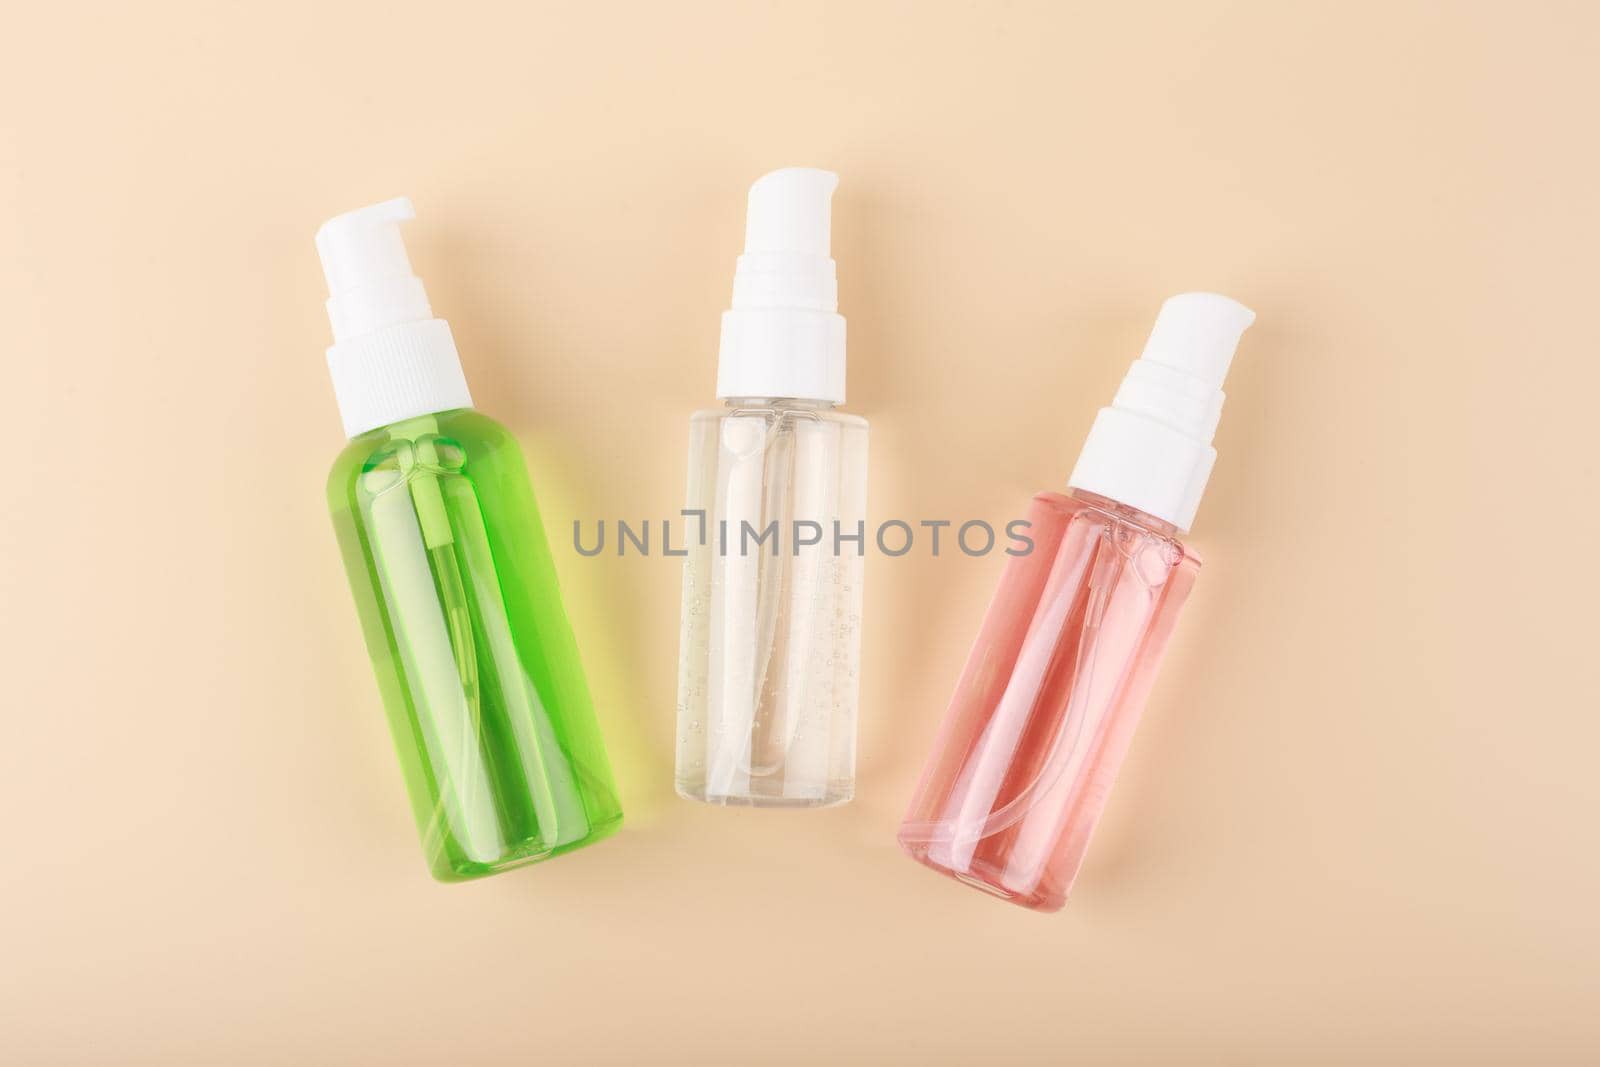 Three different face lotion, liquid foam or gel for skin cleaning in transparent tubes on bright pastel beige background. Concept of daily skin care treatment, cleaning, exfoliating and moisturizing